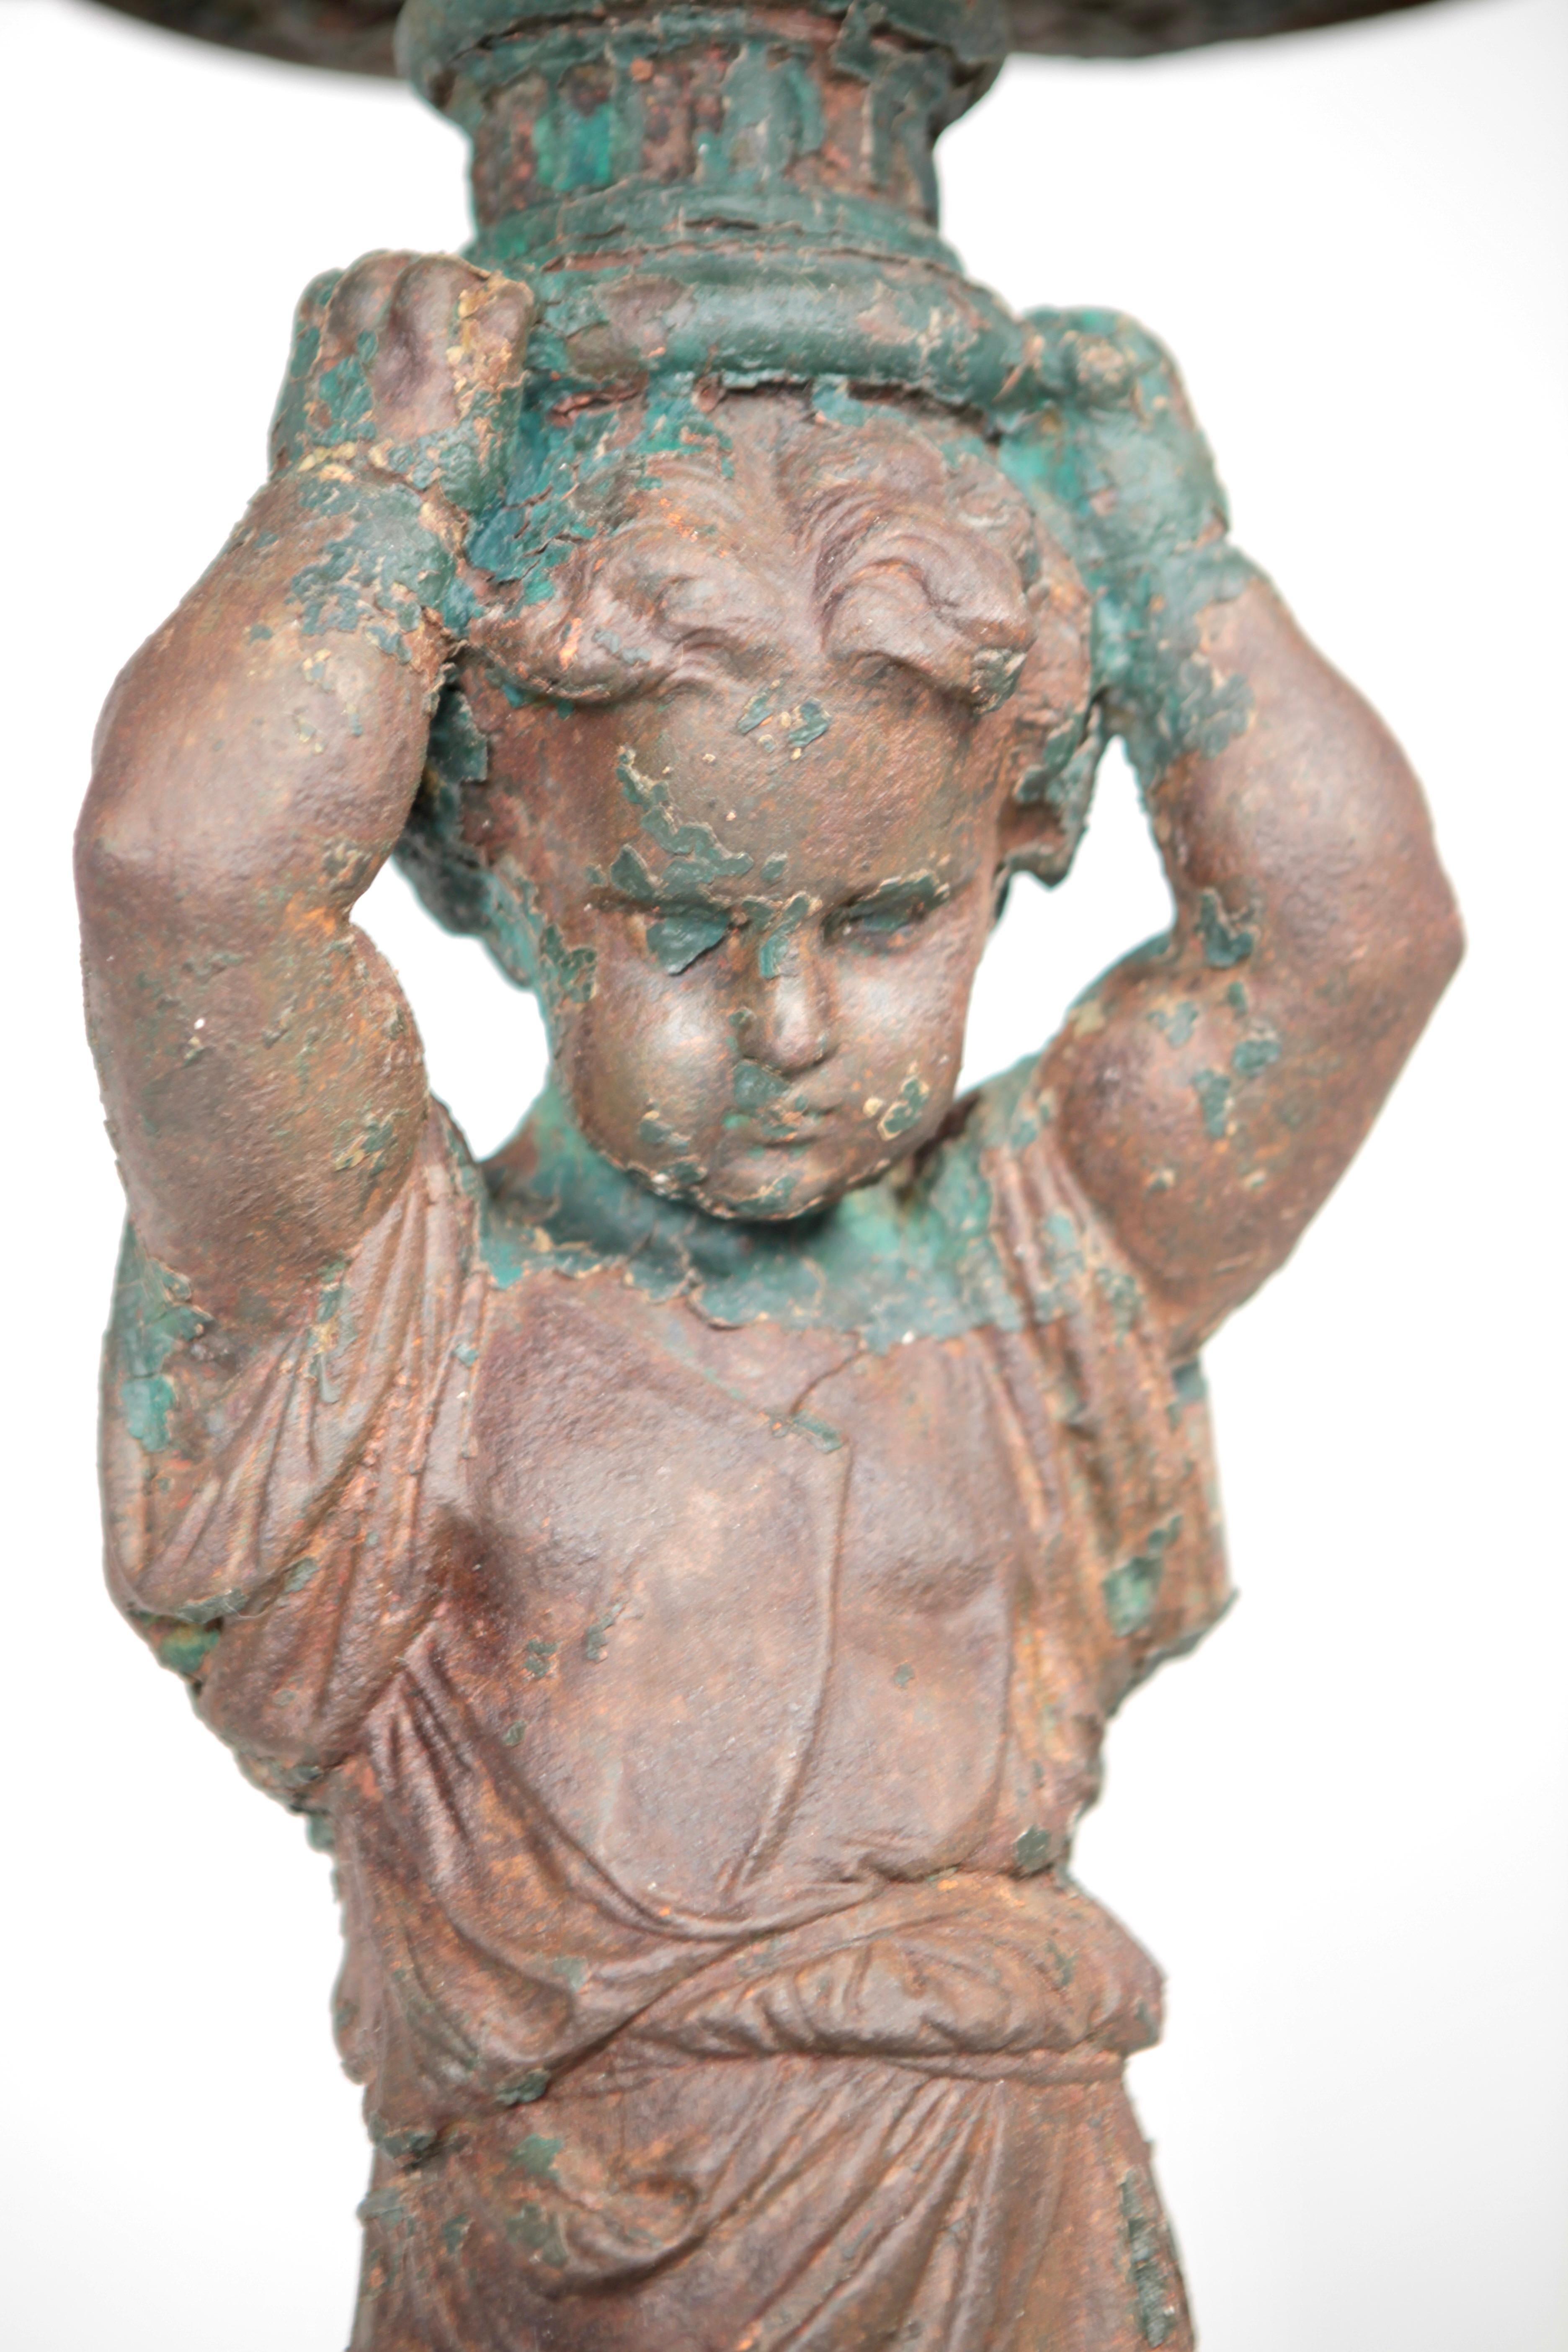 This 19th century antique cast iron statue fountain.
Fantastic, vibrant patina with traces of ancient paint.